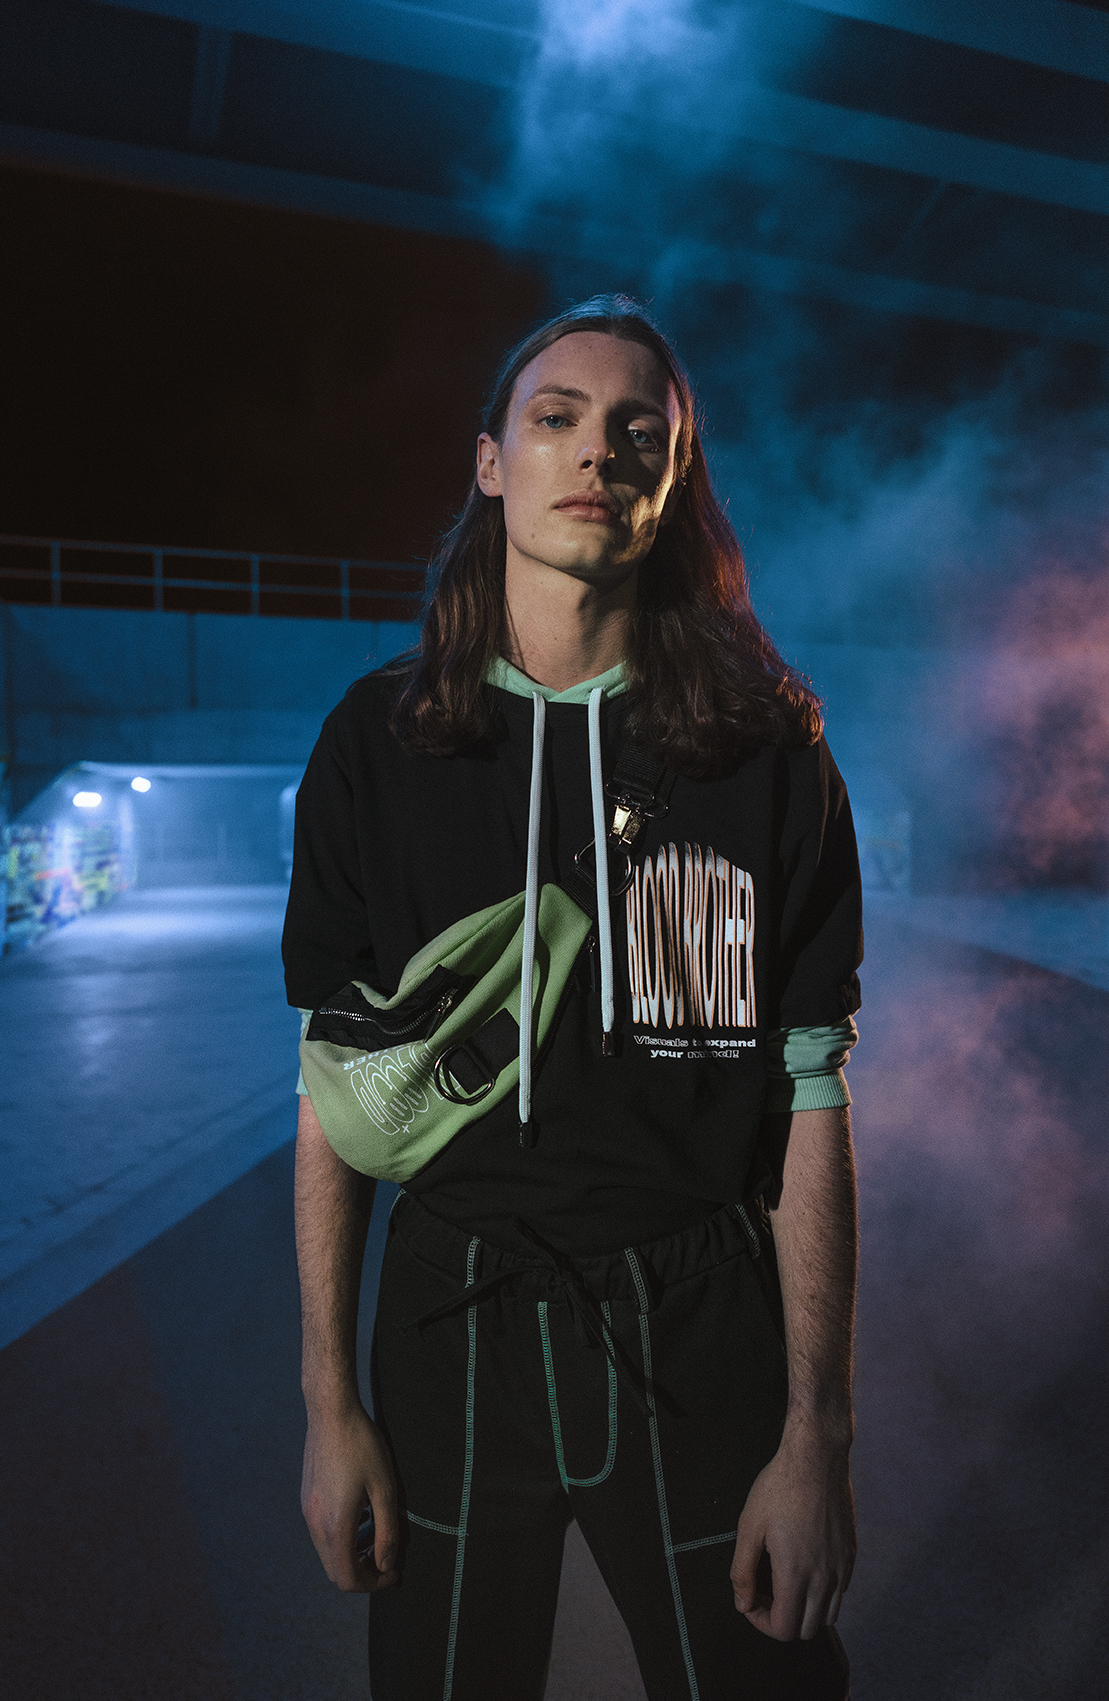 Blood Brother x Selfridges Announce Music Matters Capsule Collection